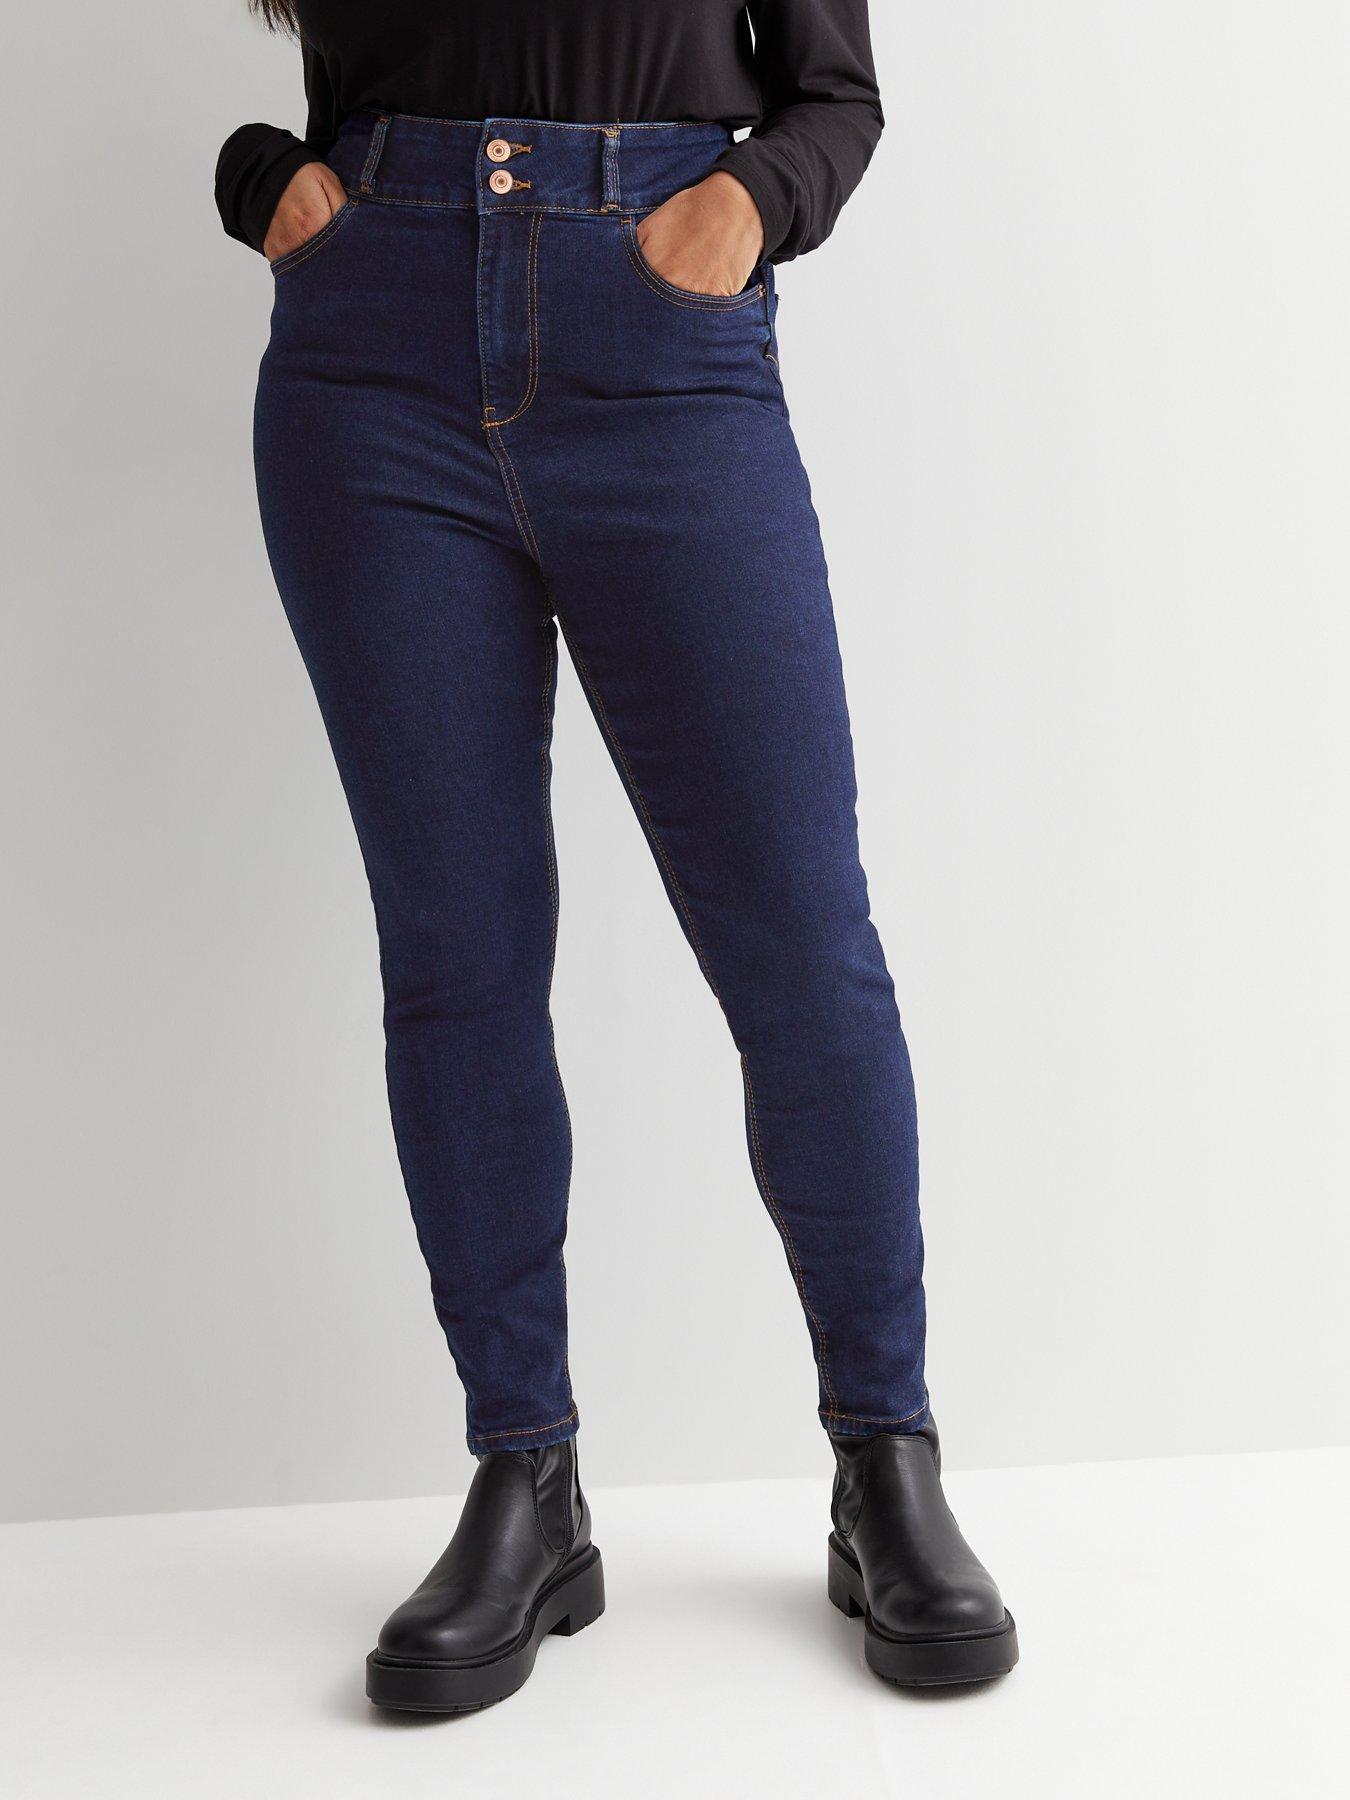 Yours Grace Turn Up Jeggings Mid Blue